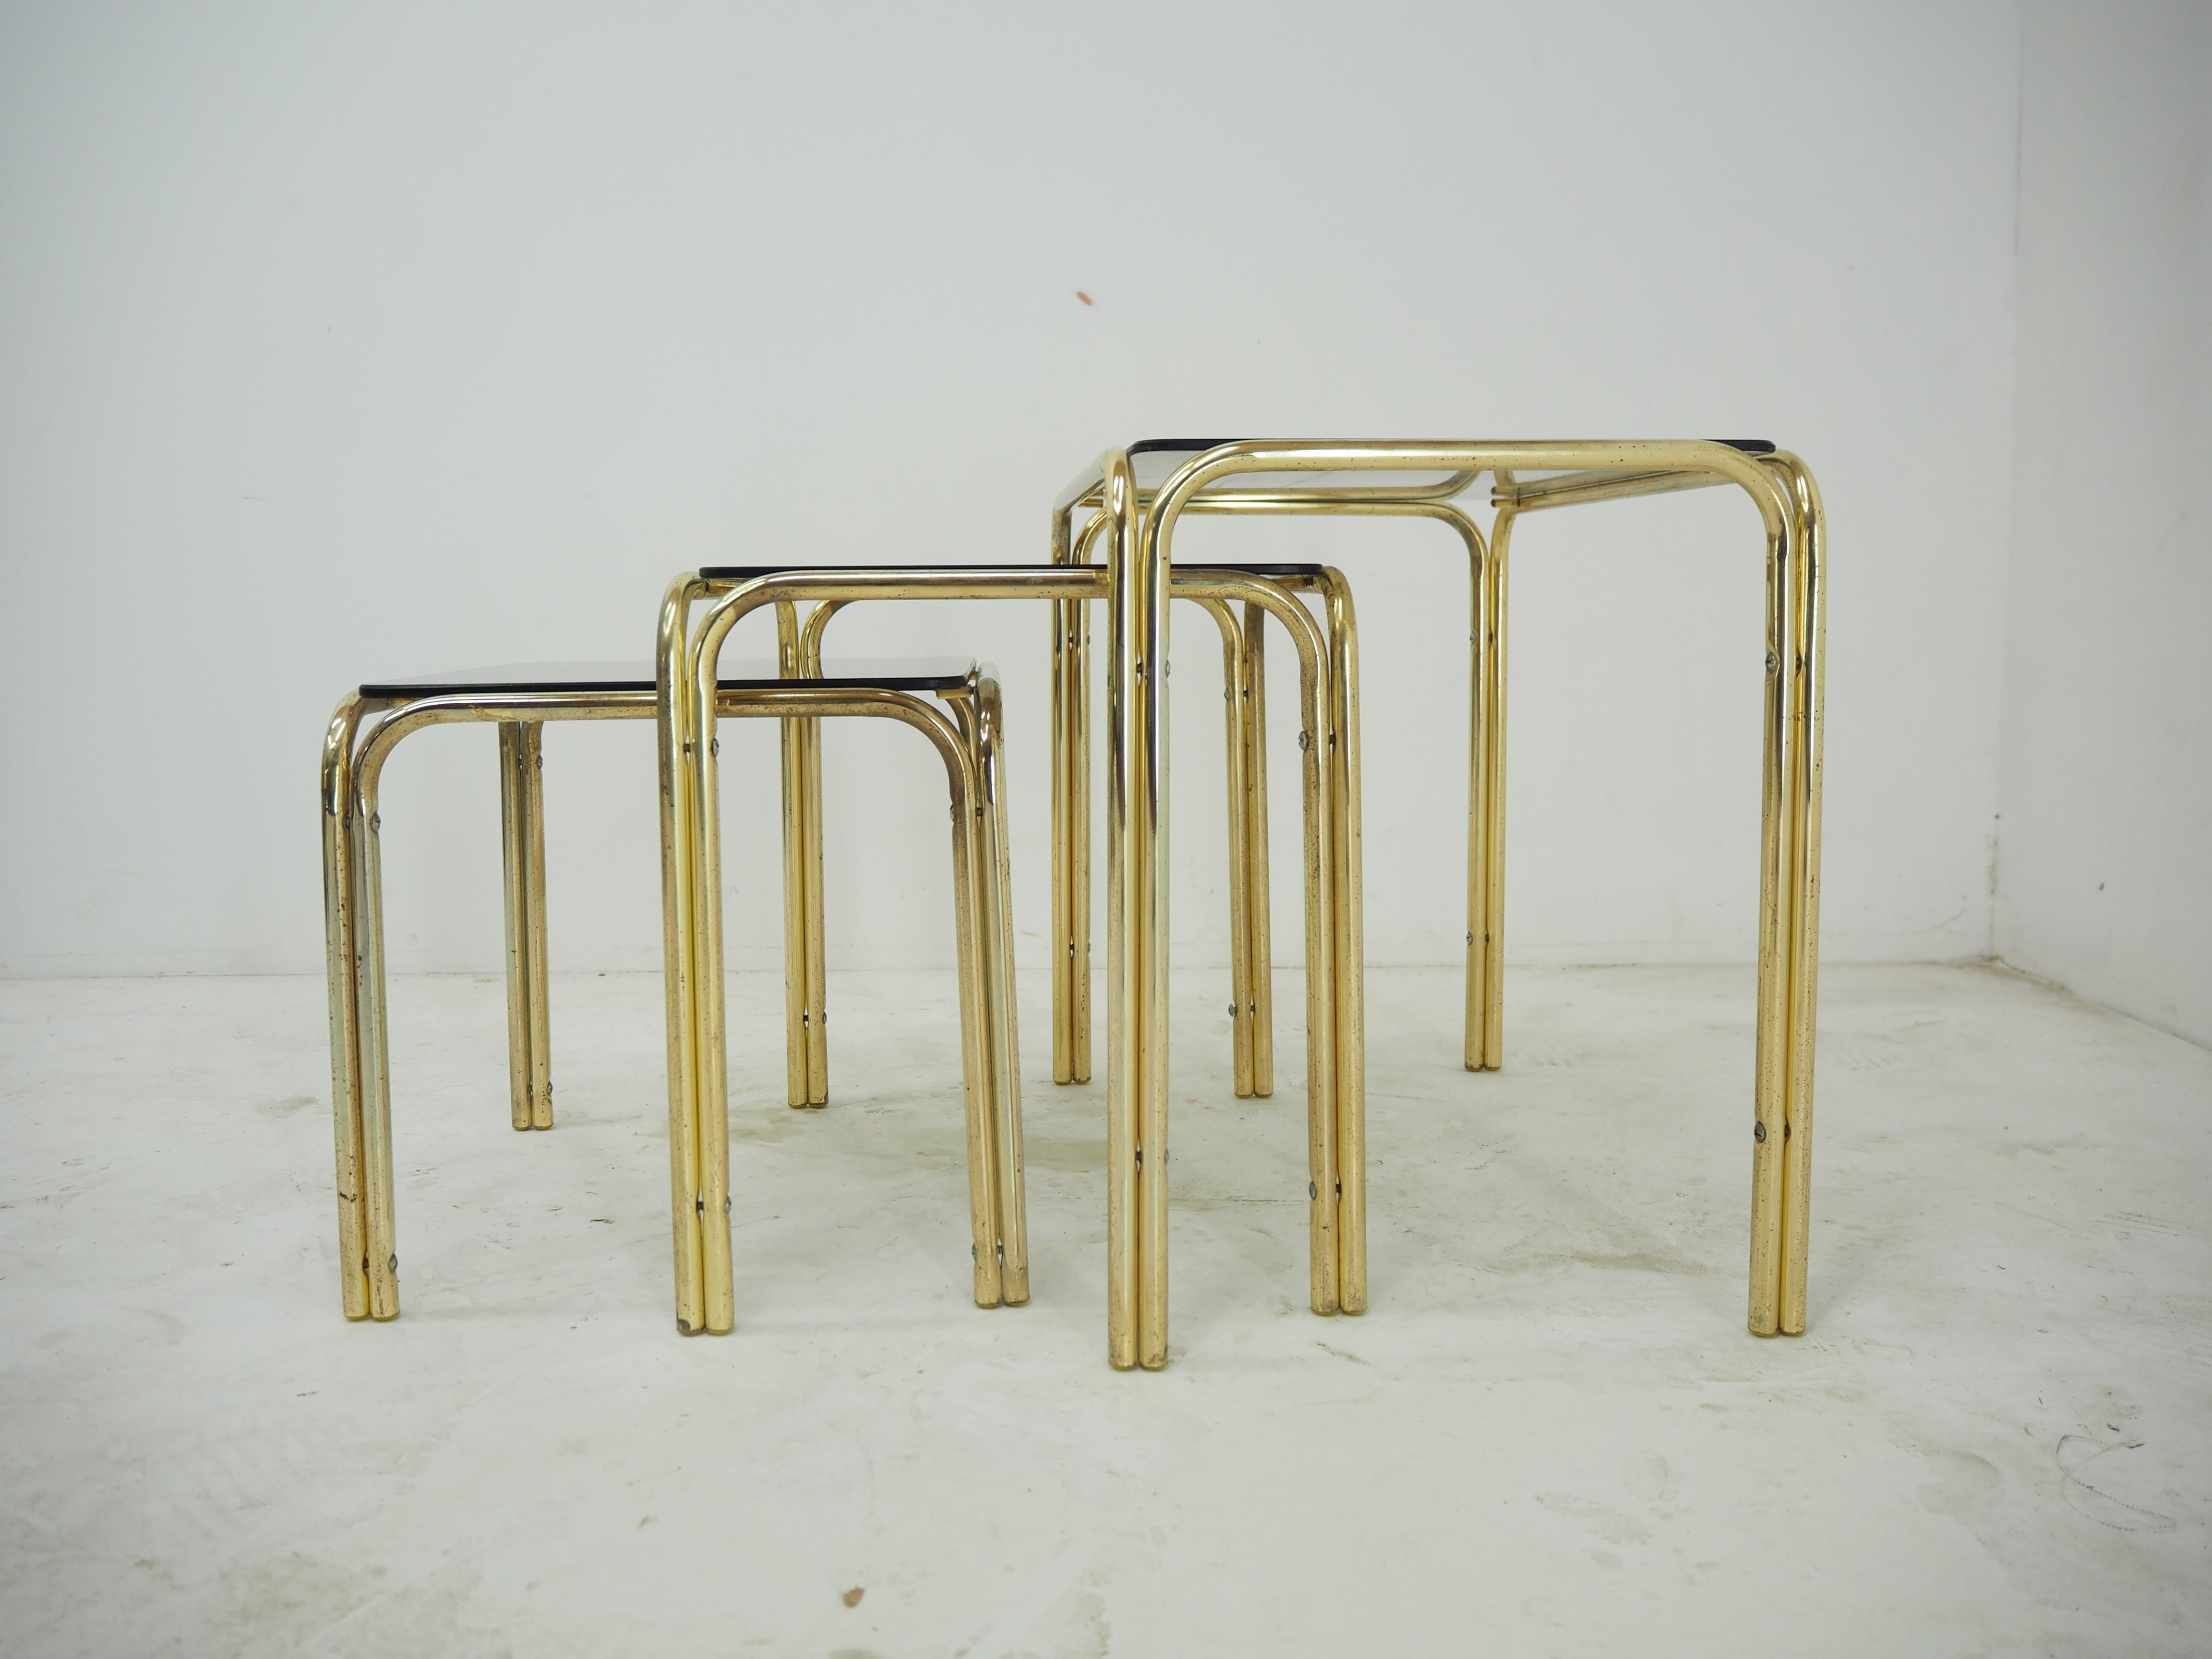 Midcentury Brass & Smoked Glass Nesting Tables, 1970s For Sale 5